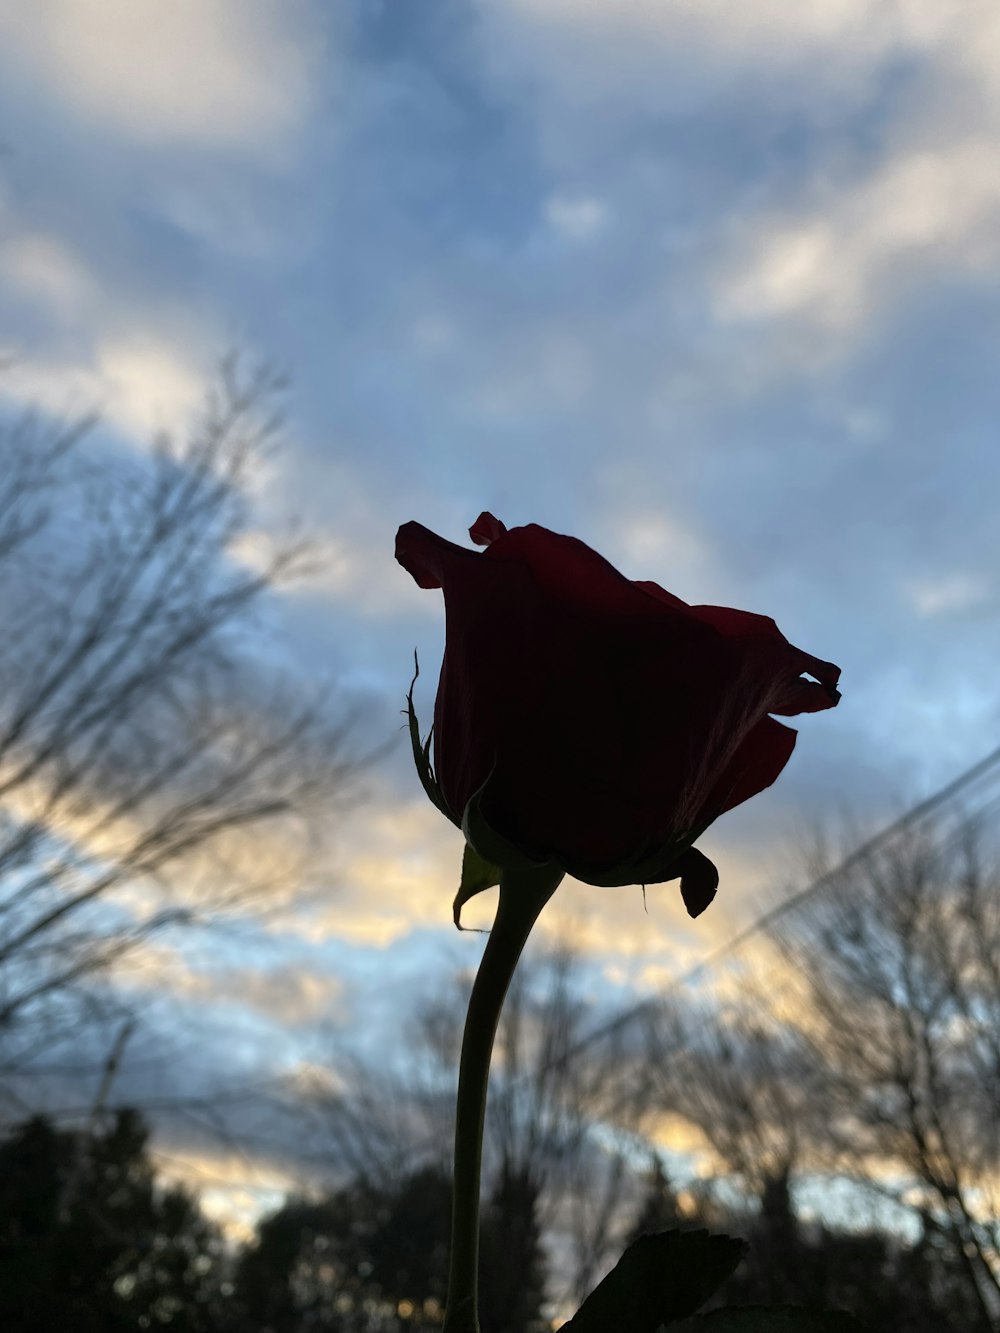 a single red rose in front of a cloudy sky